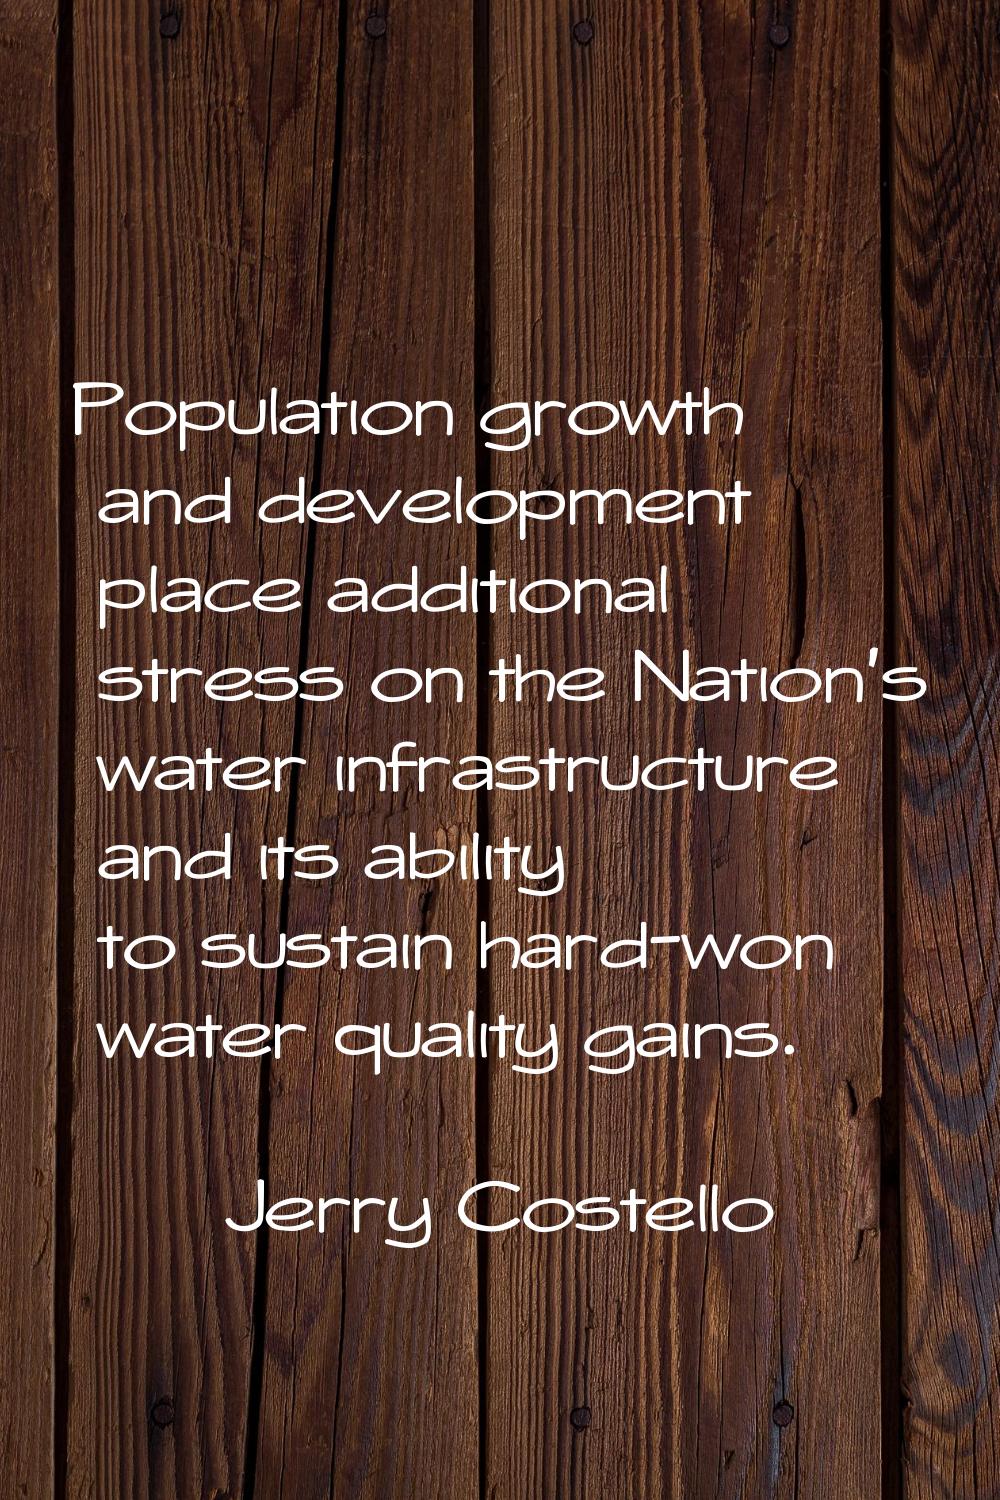 Population growth and development place additional stress on the Nation's water infrastructure and 